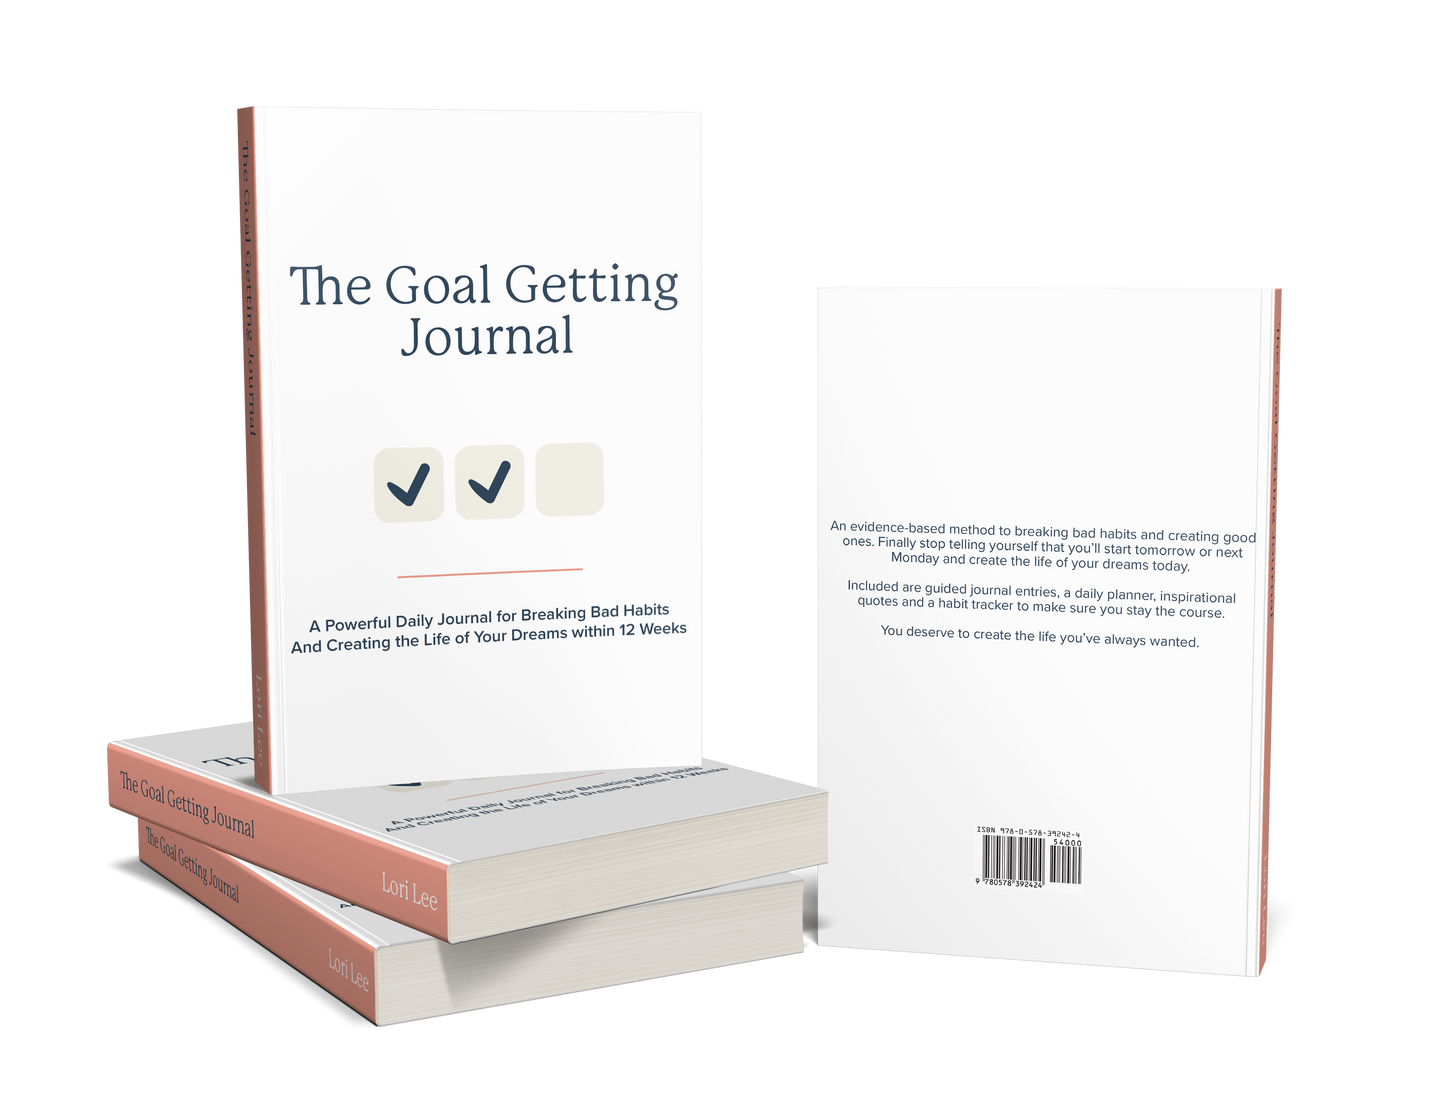 The Goal Getting Journal